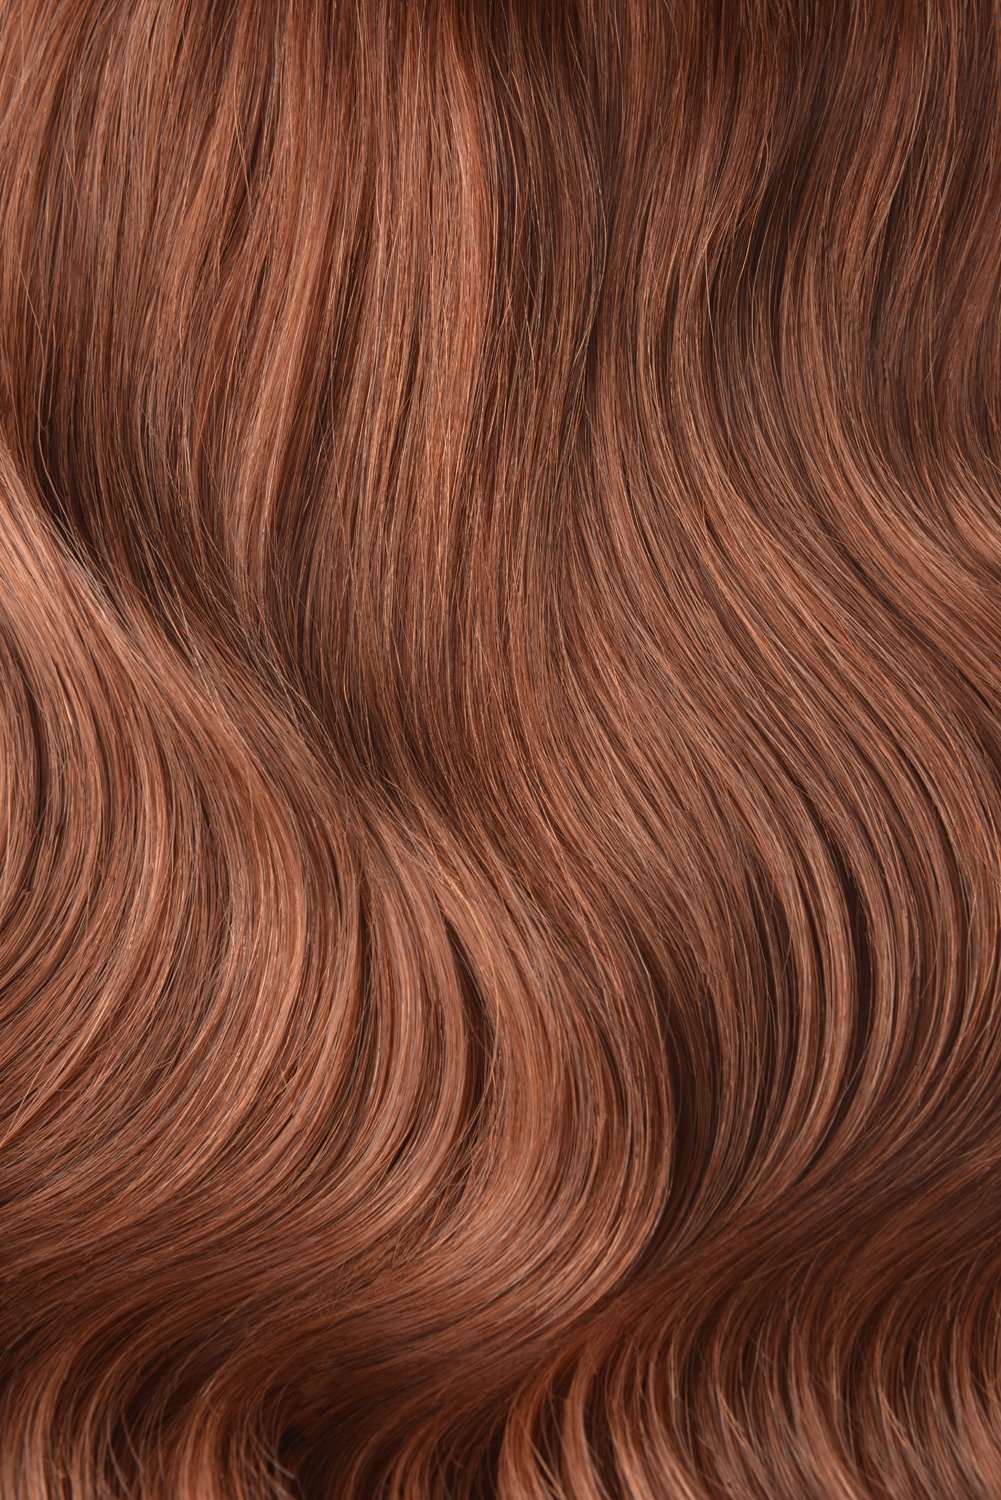 Double Wefted Full Head Remy Clip in Human Hair Extensions -  Dark Auburn/Copper Red (#33)